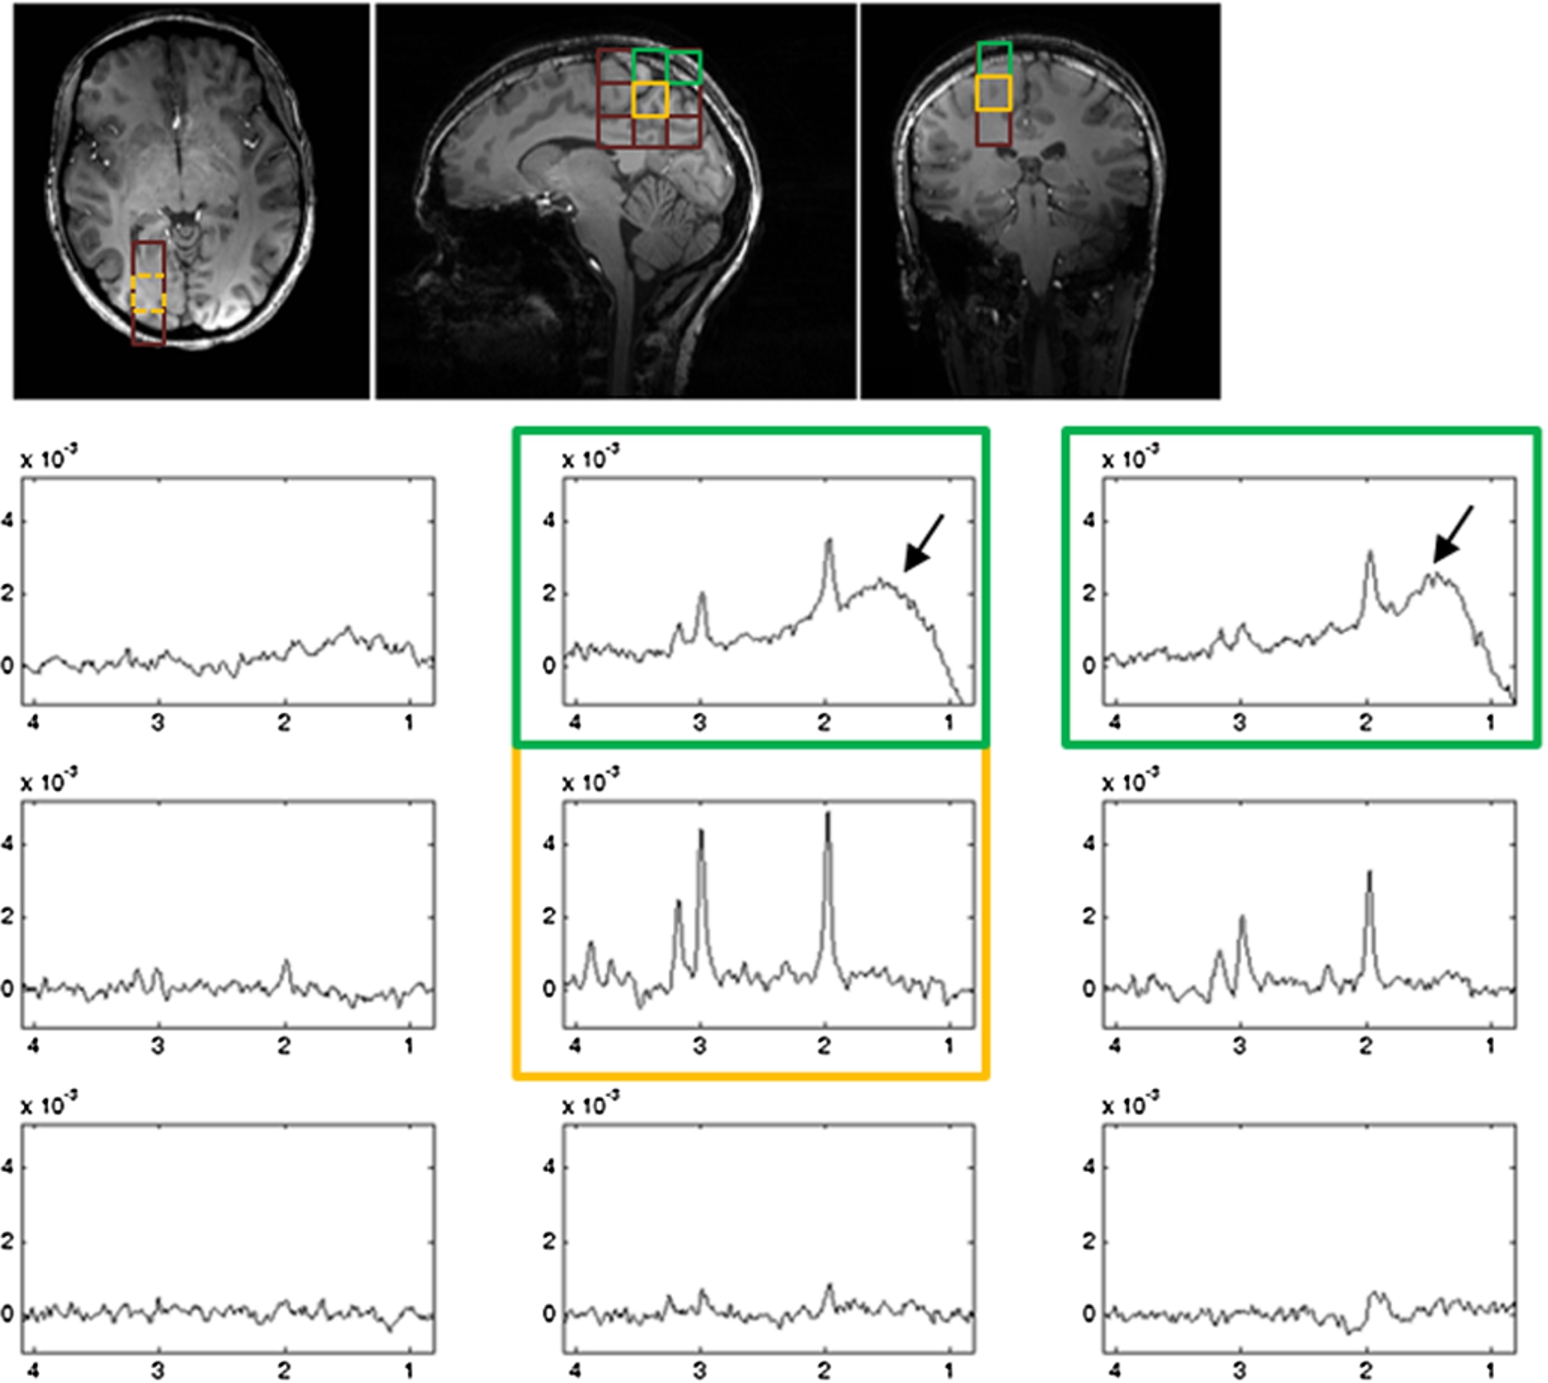 Examples of spatially arrayed spectra from Subject 1 (A) and Subject 5 (B). Different rows and columns correspond to different red grids overlaid on the T1-weighted image in Fig. 5. Spectra from VOI are marked by yellow squares. Black arrows indicate that lipid signals were found in spectra from some non-VOI voxels for subject 1 (A) and most of the non-VOI voxels for subject 5 (B).